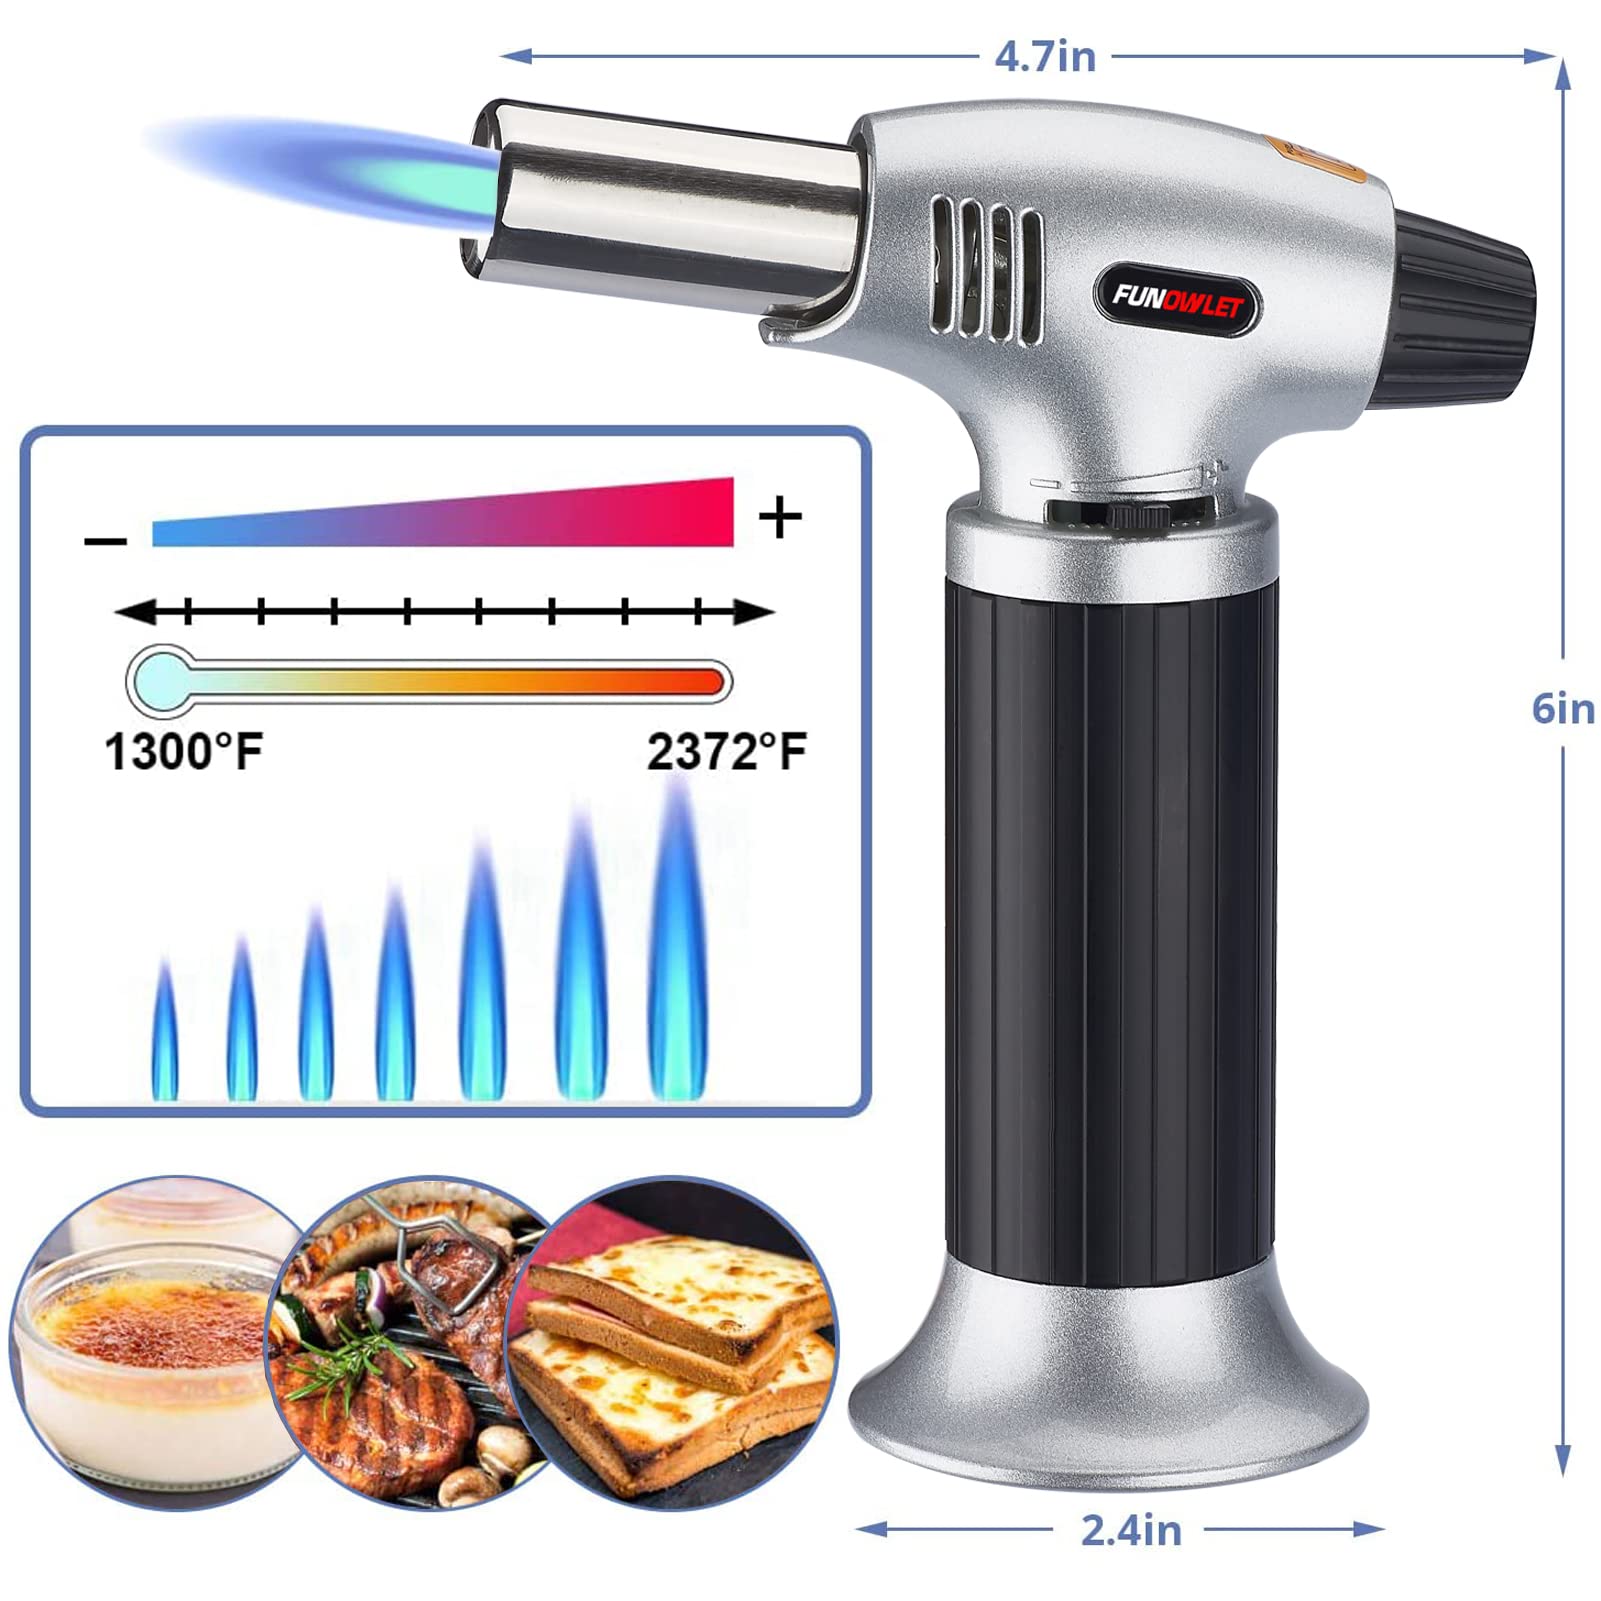 FunOwlet Butane Torch Lighter + Butane Torch Head, Culinary Torches Chef Cooking Professional Adjustable Flame with Reverse Use for Creme, Brulee, BBQ, Baking, Jewelry